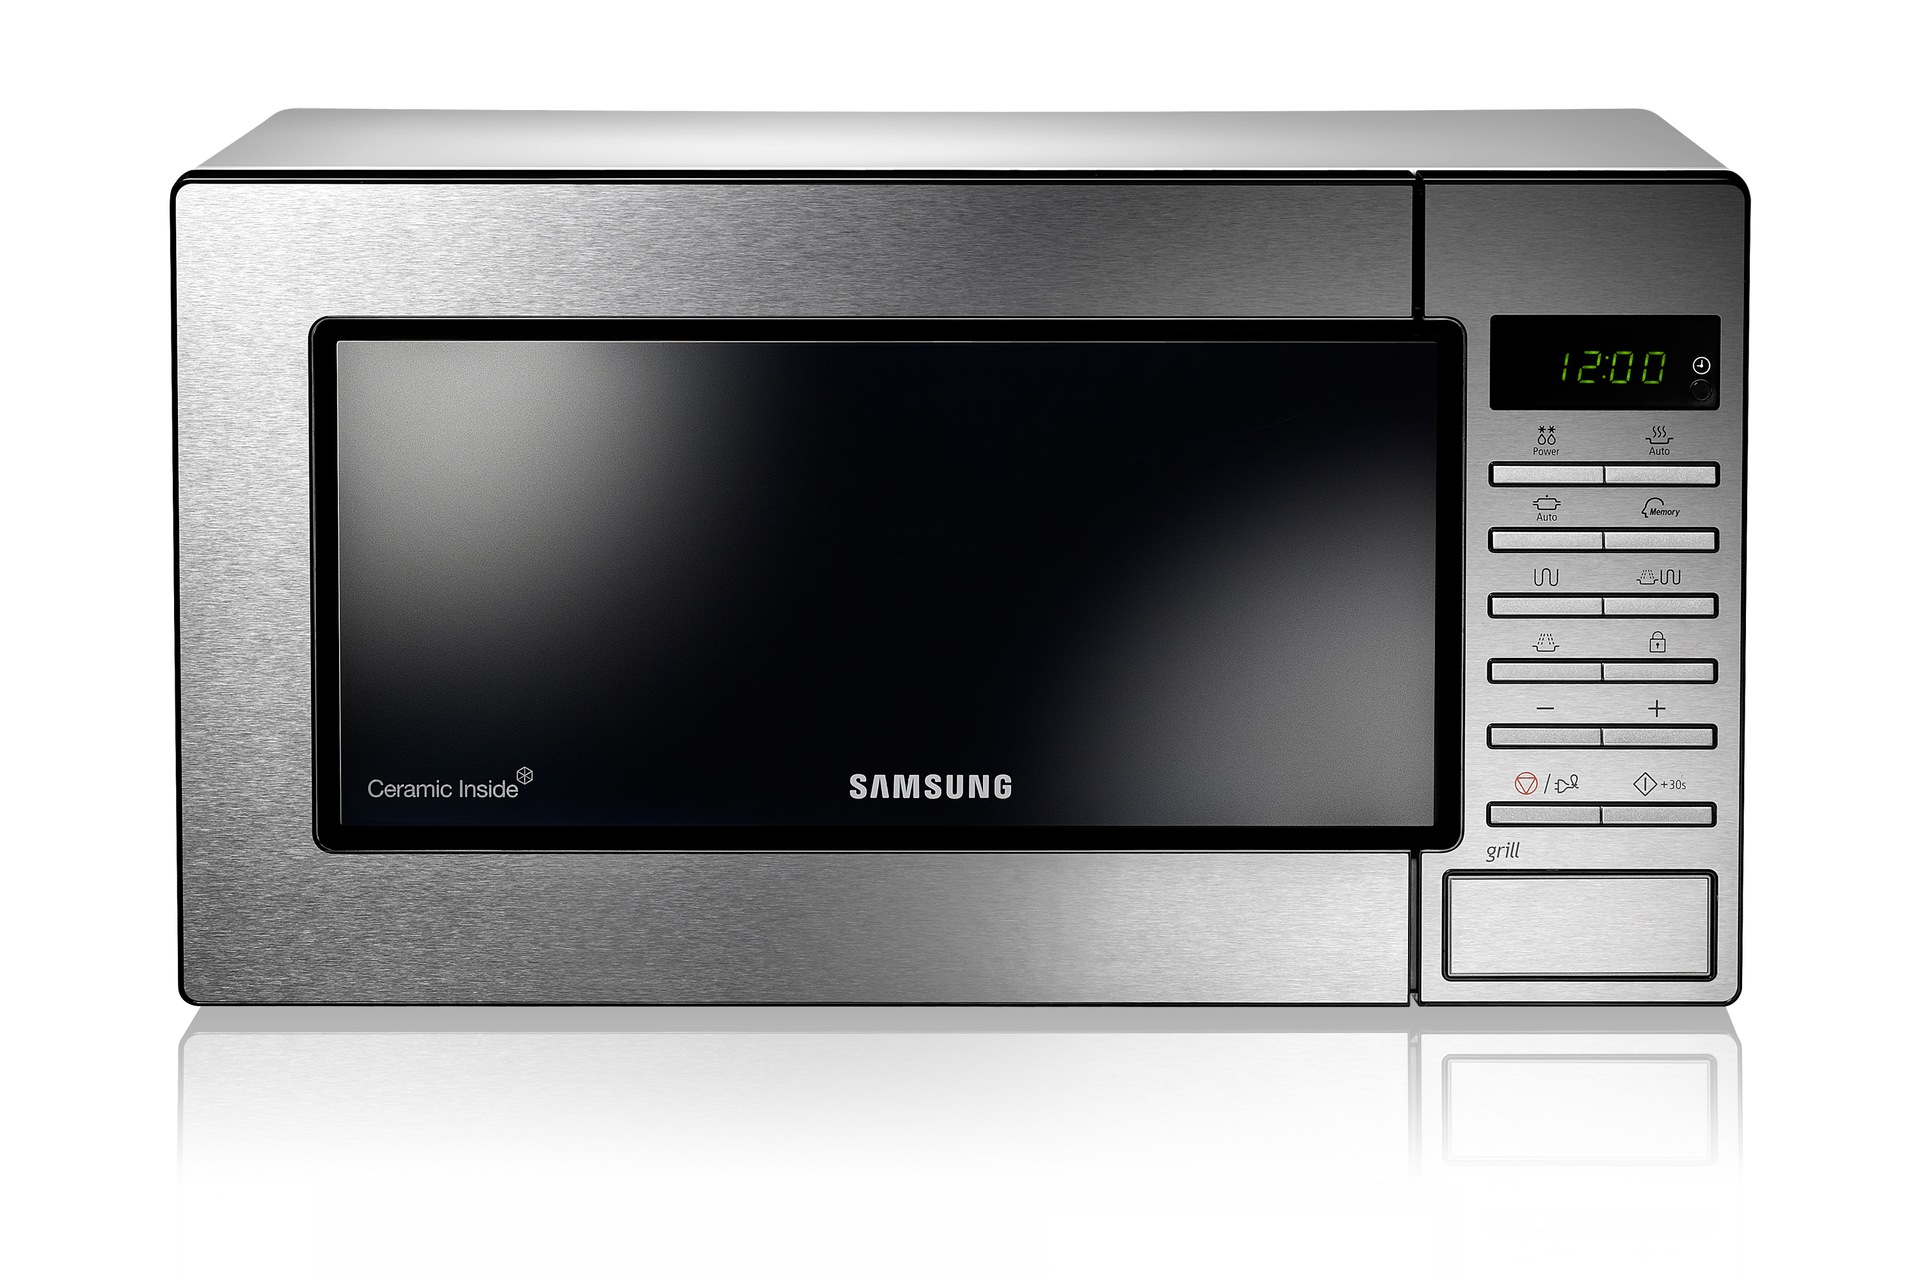 https://images.samsung.com/is/image/samsung/es-microwave-ge87m-x-ge87m-x-xec-frontsilver-62978361?$650_519_PNG$